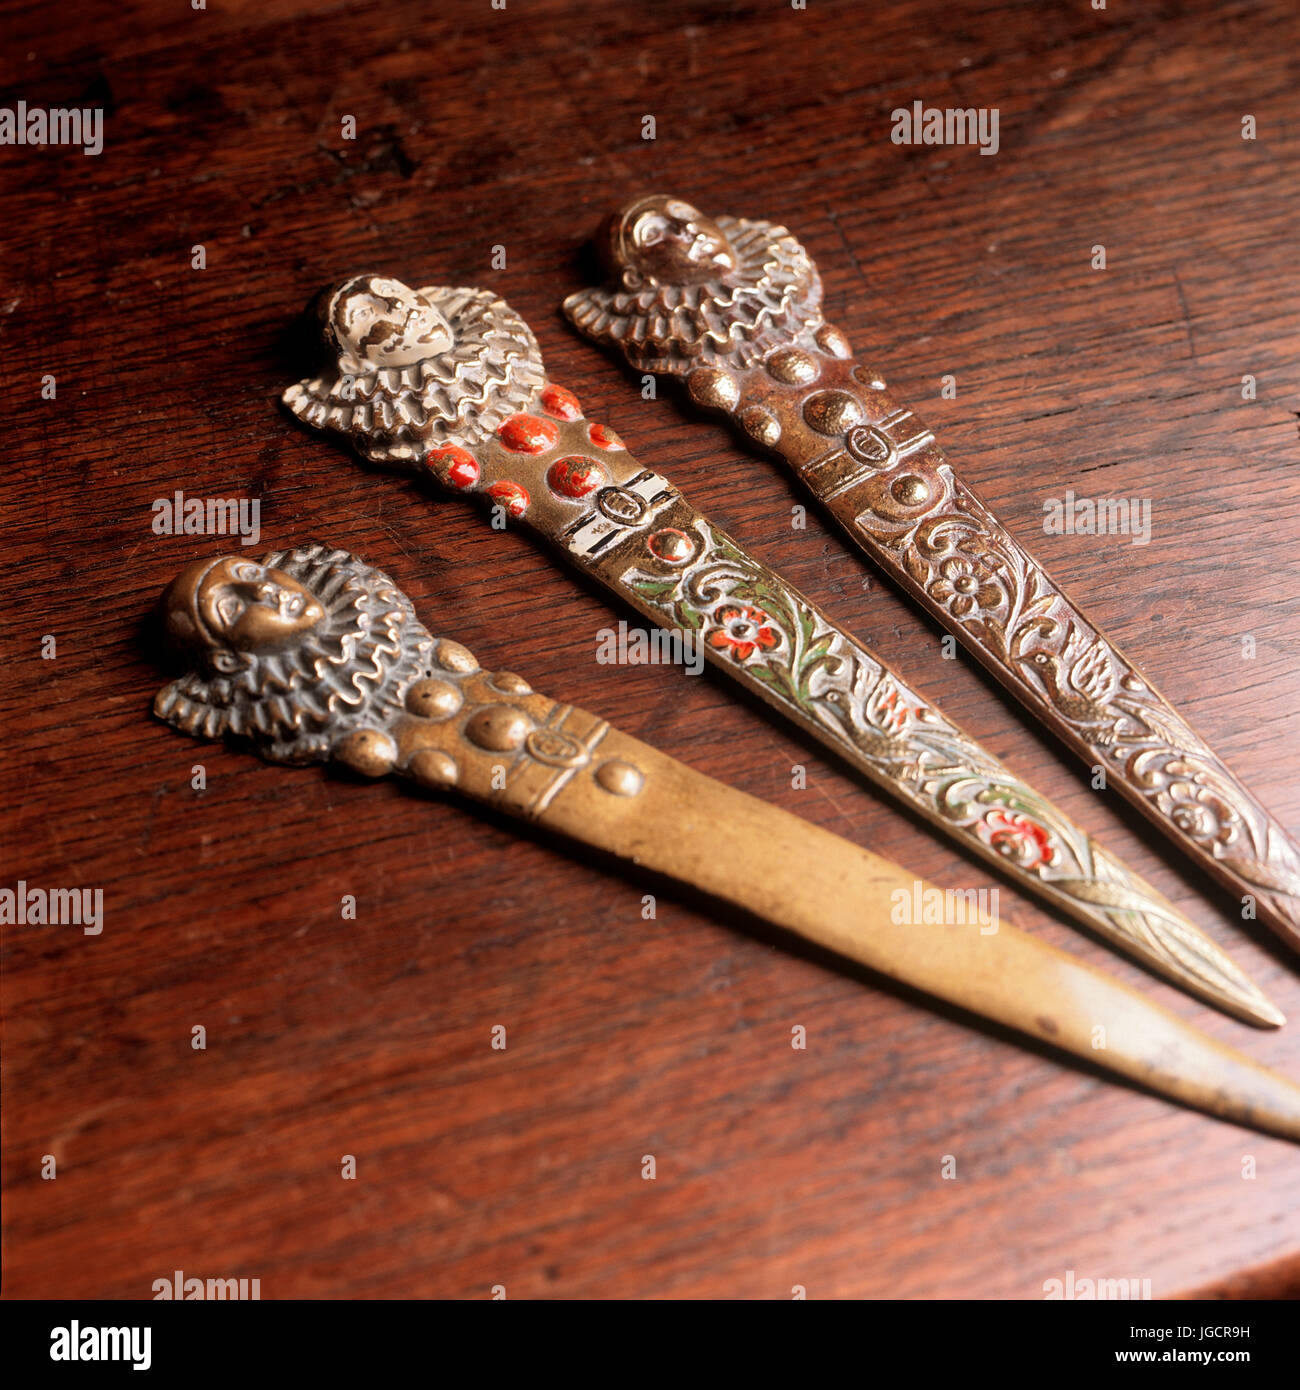 Matching letter openers Stock Photo